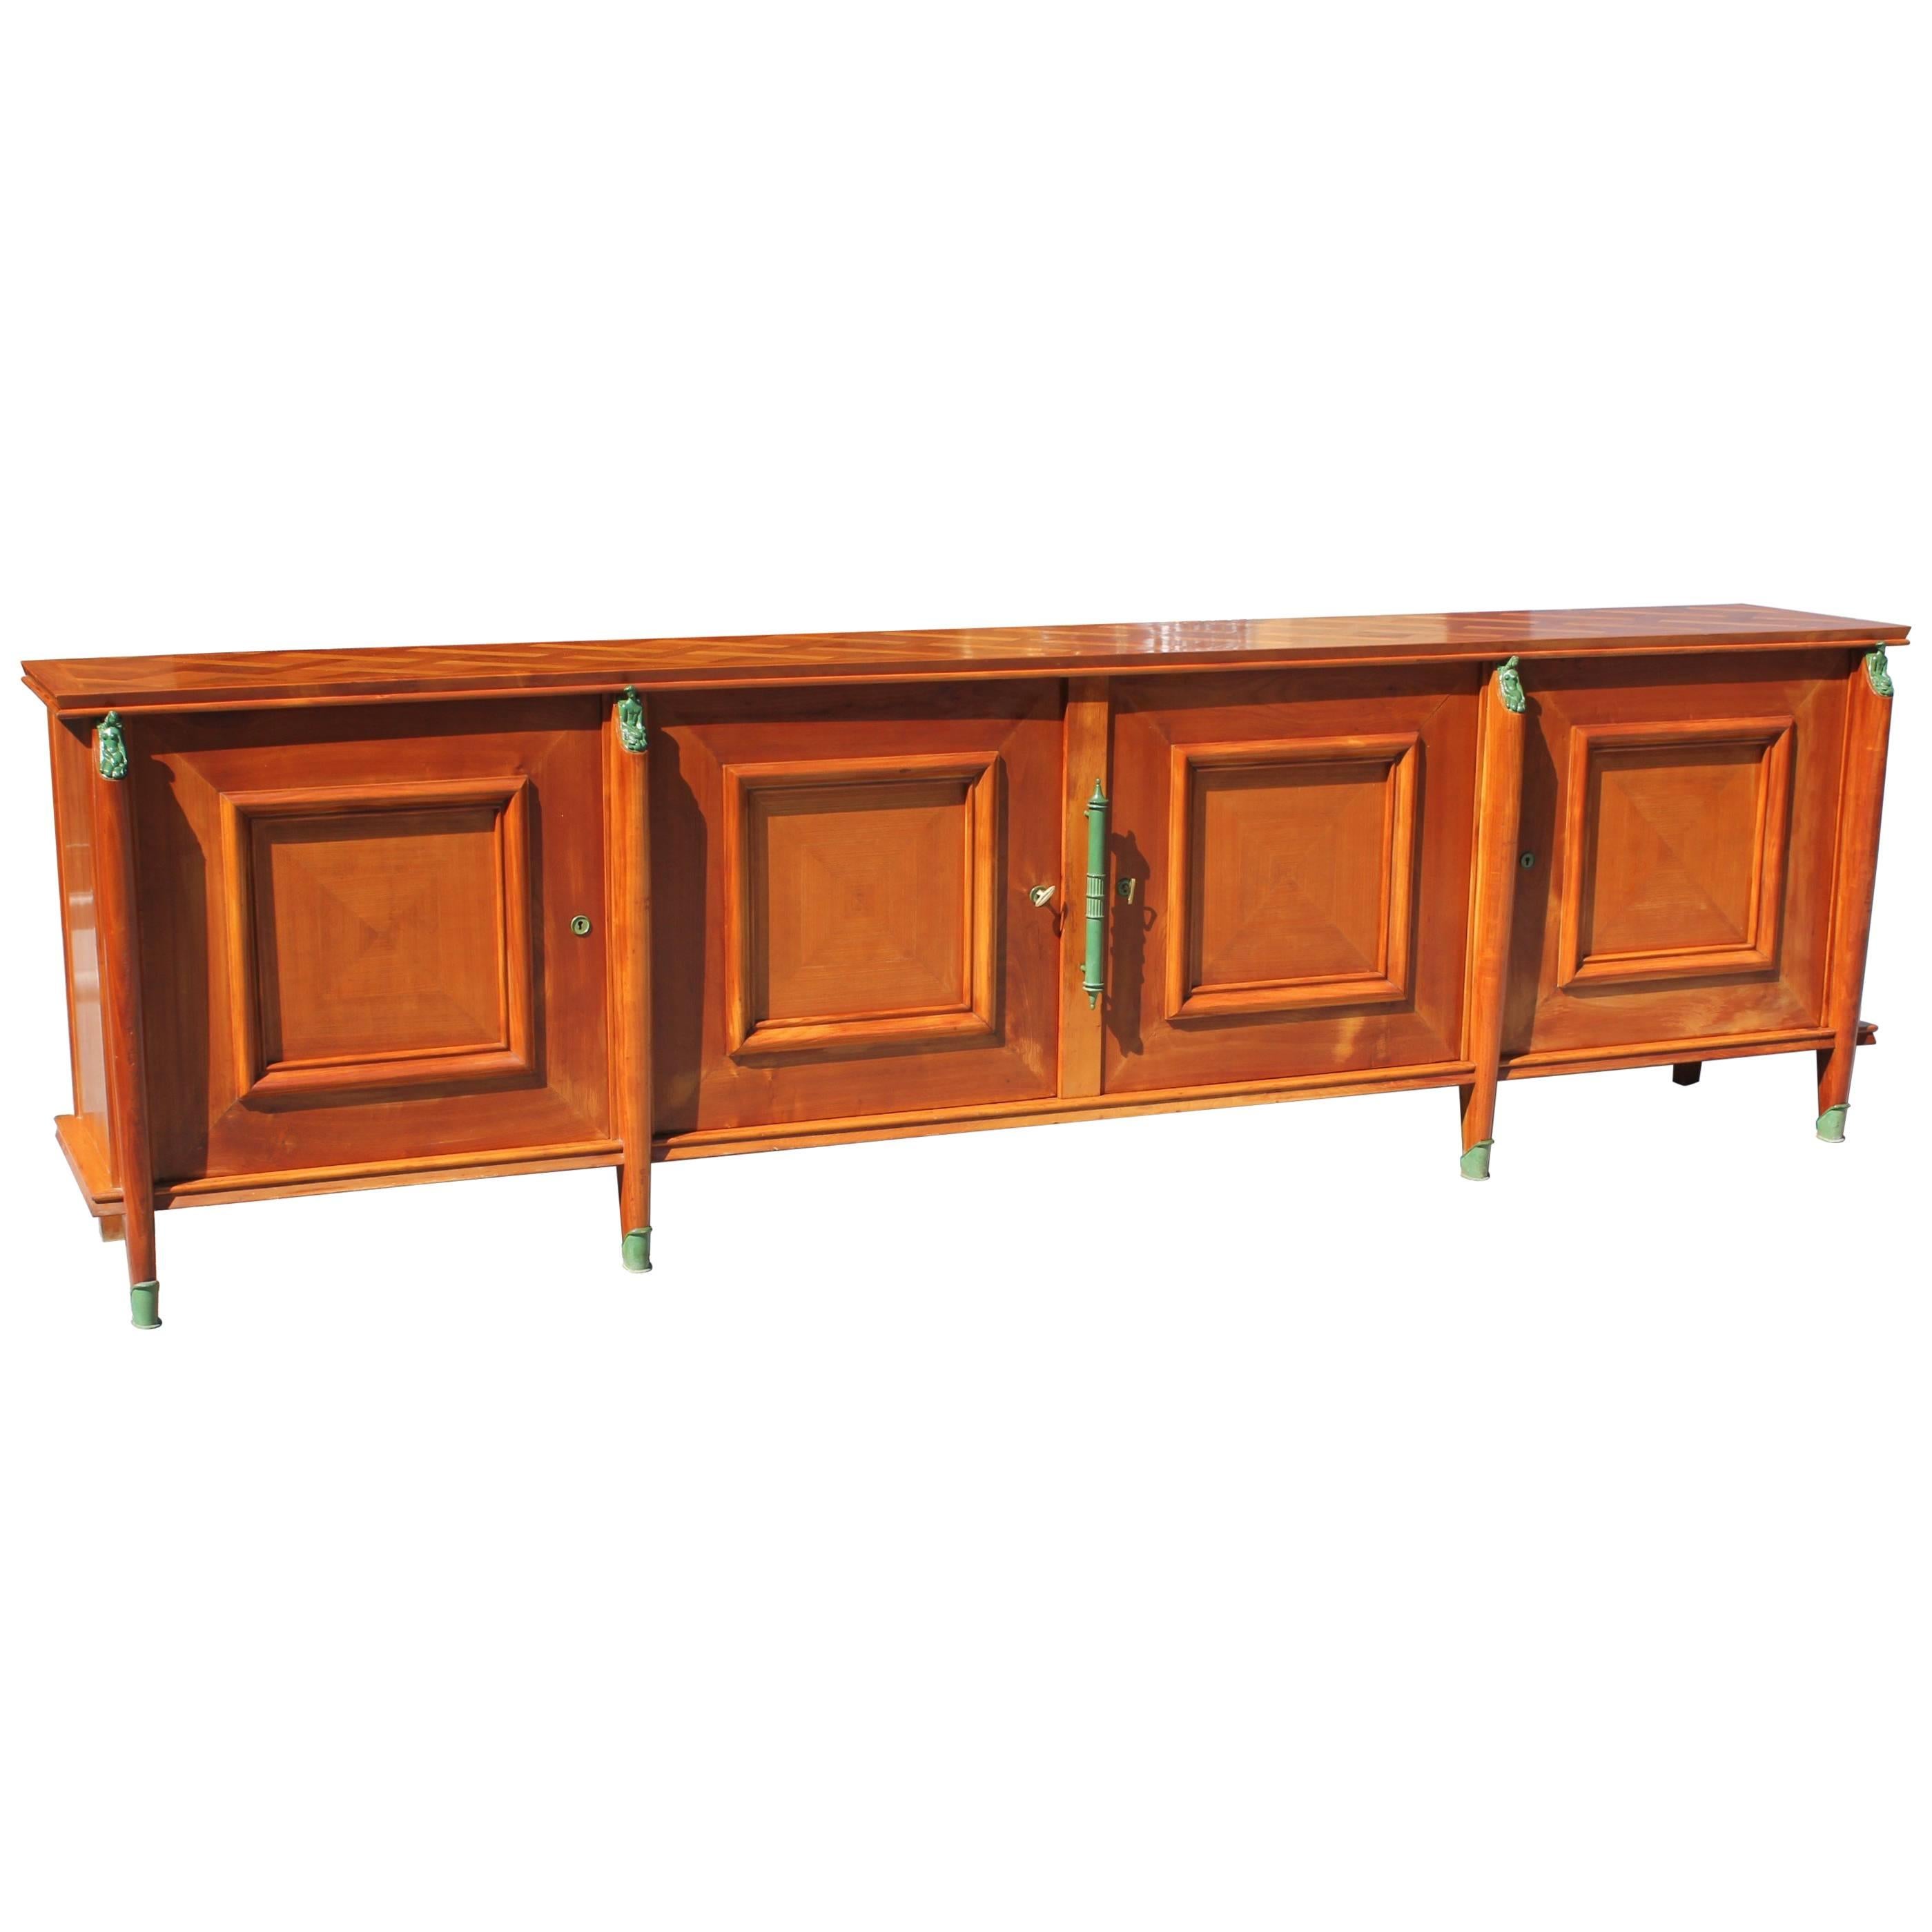 Master Piece French Art Deco Sideboard / Buffet Cherrywood by Leon Jallot, 1930s For Sale